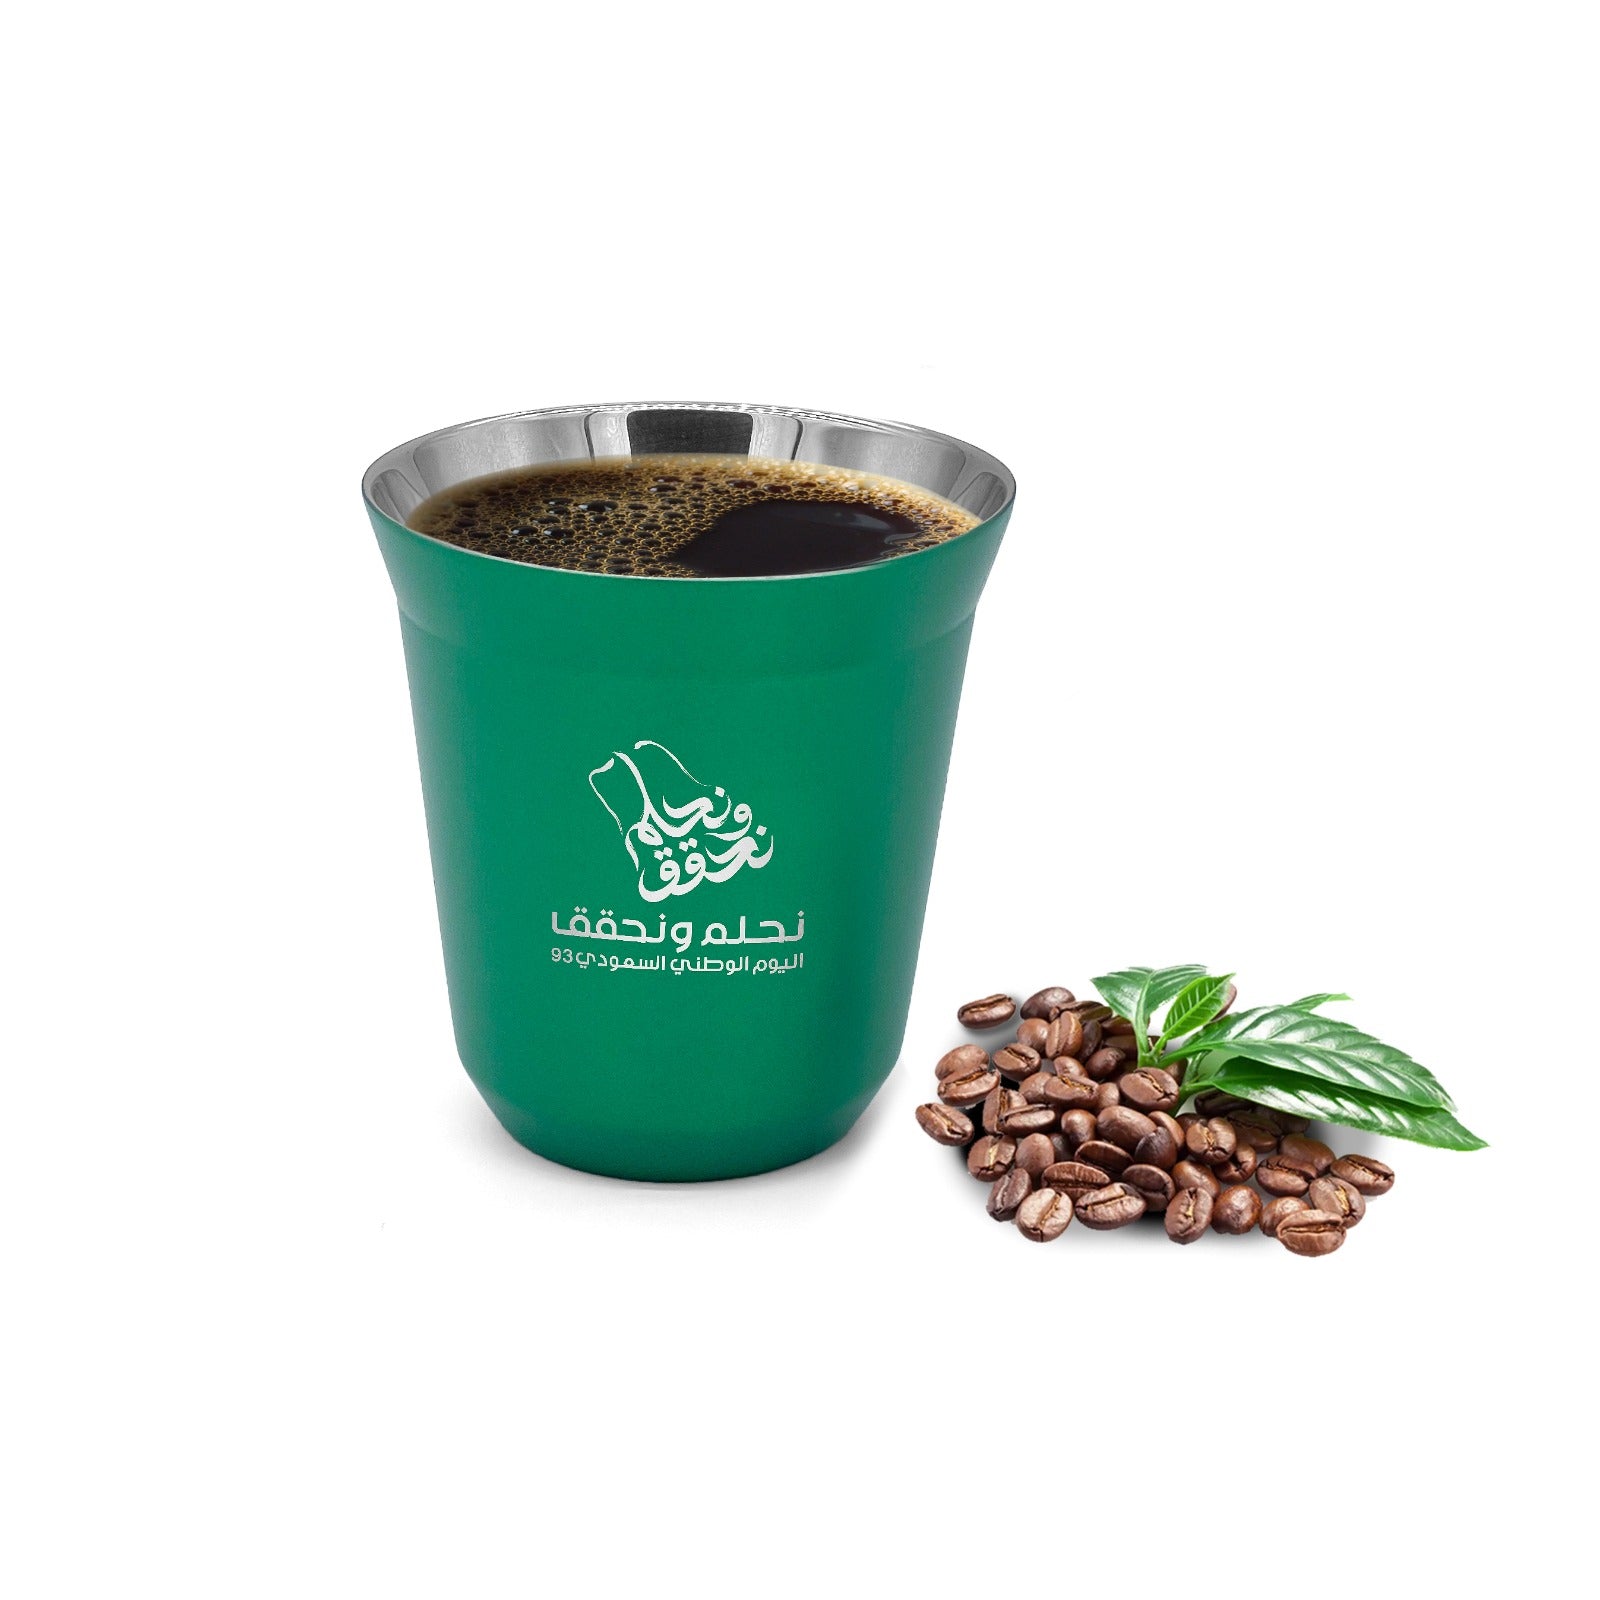 Rovatti Stainless Coffee Cup KSA National Day 93 Special